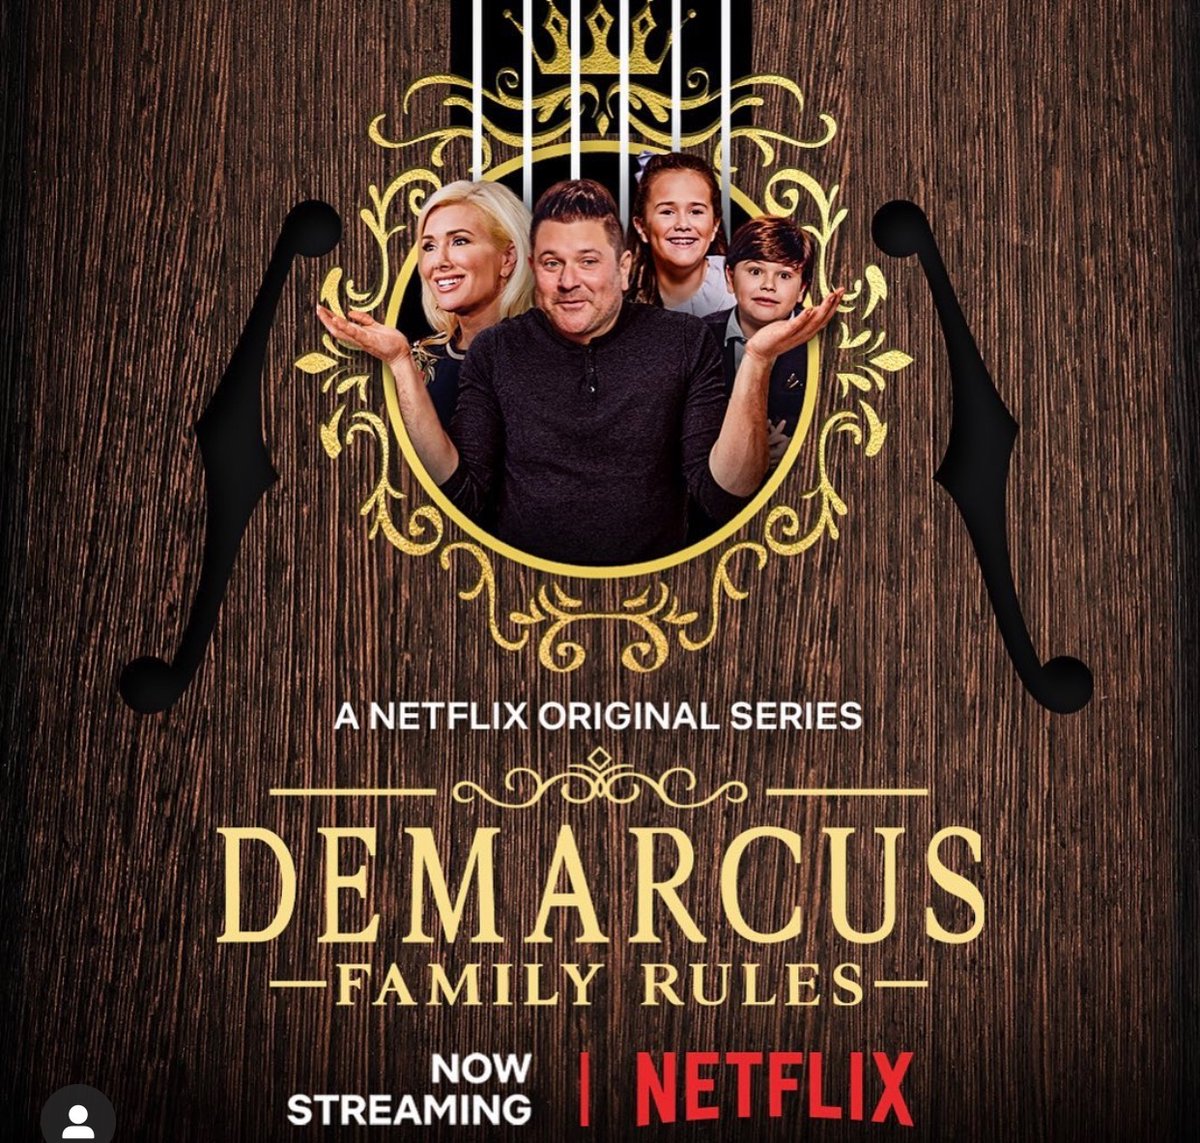 All 6 episodes of Demarcus family rules is available to binge watch right now.